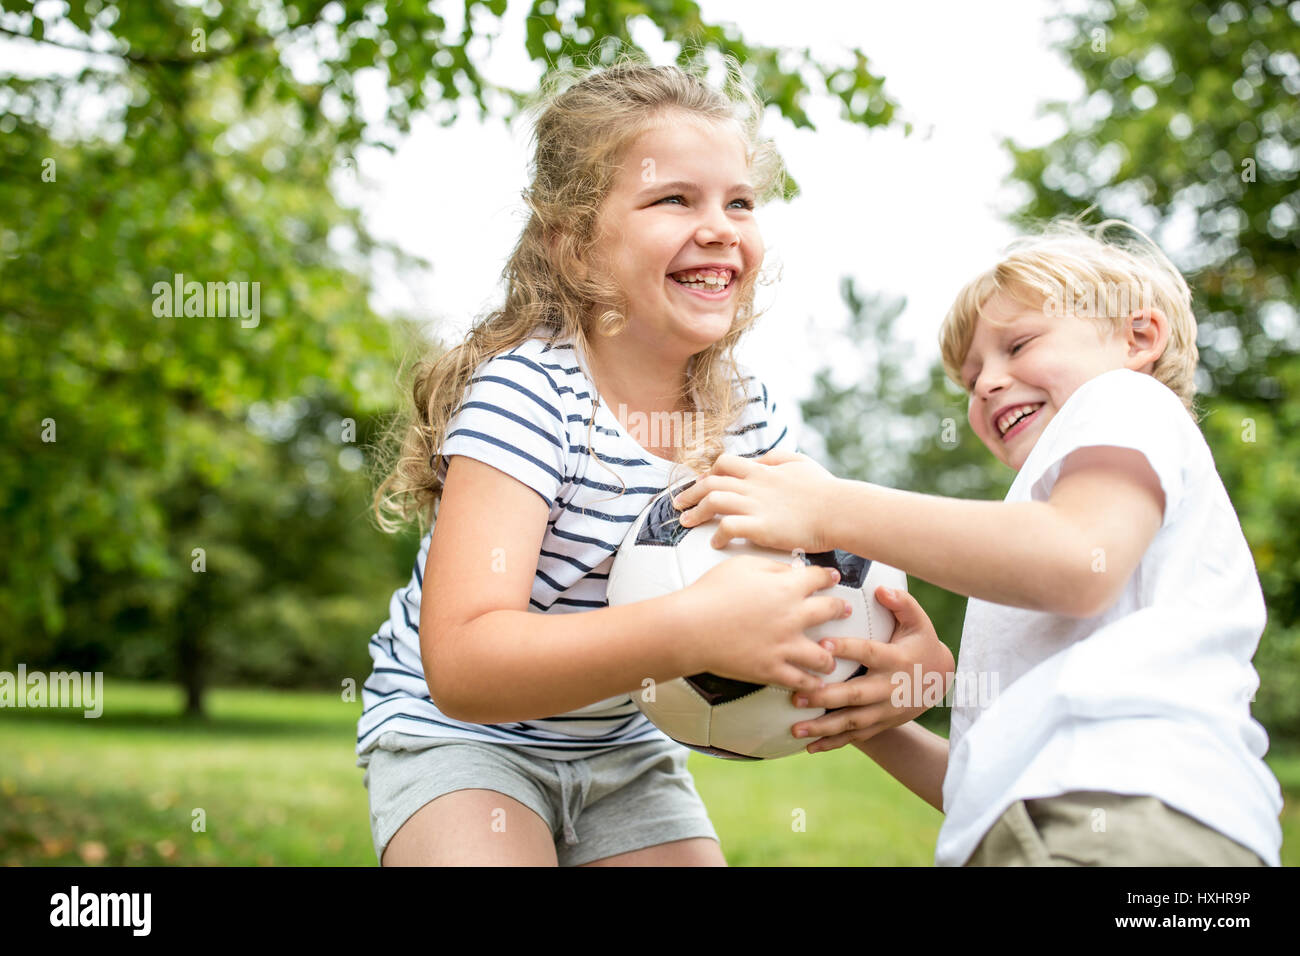 Controversy between children and a ball during family soccer match Stock Photo